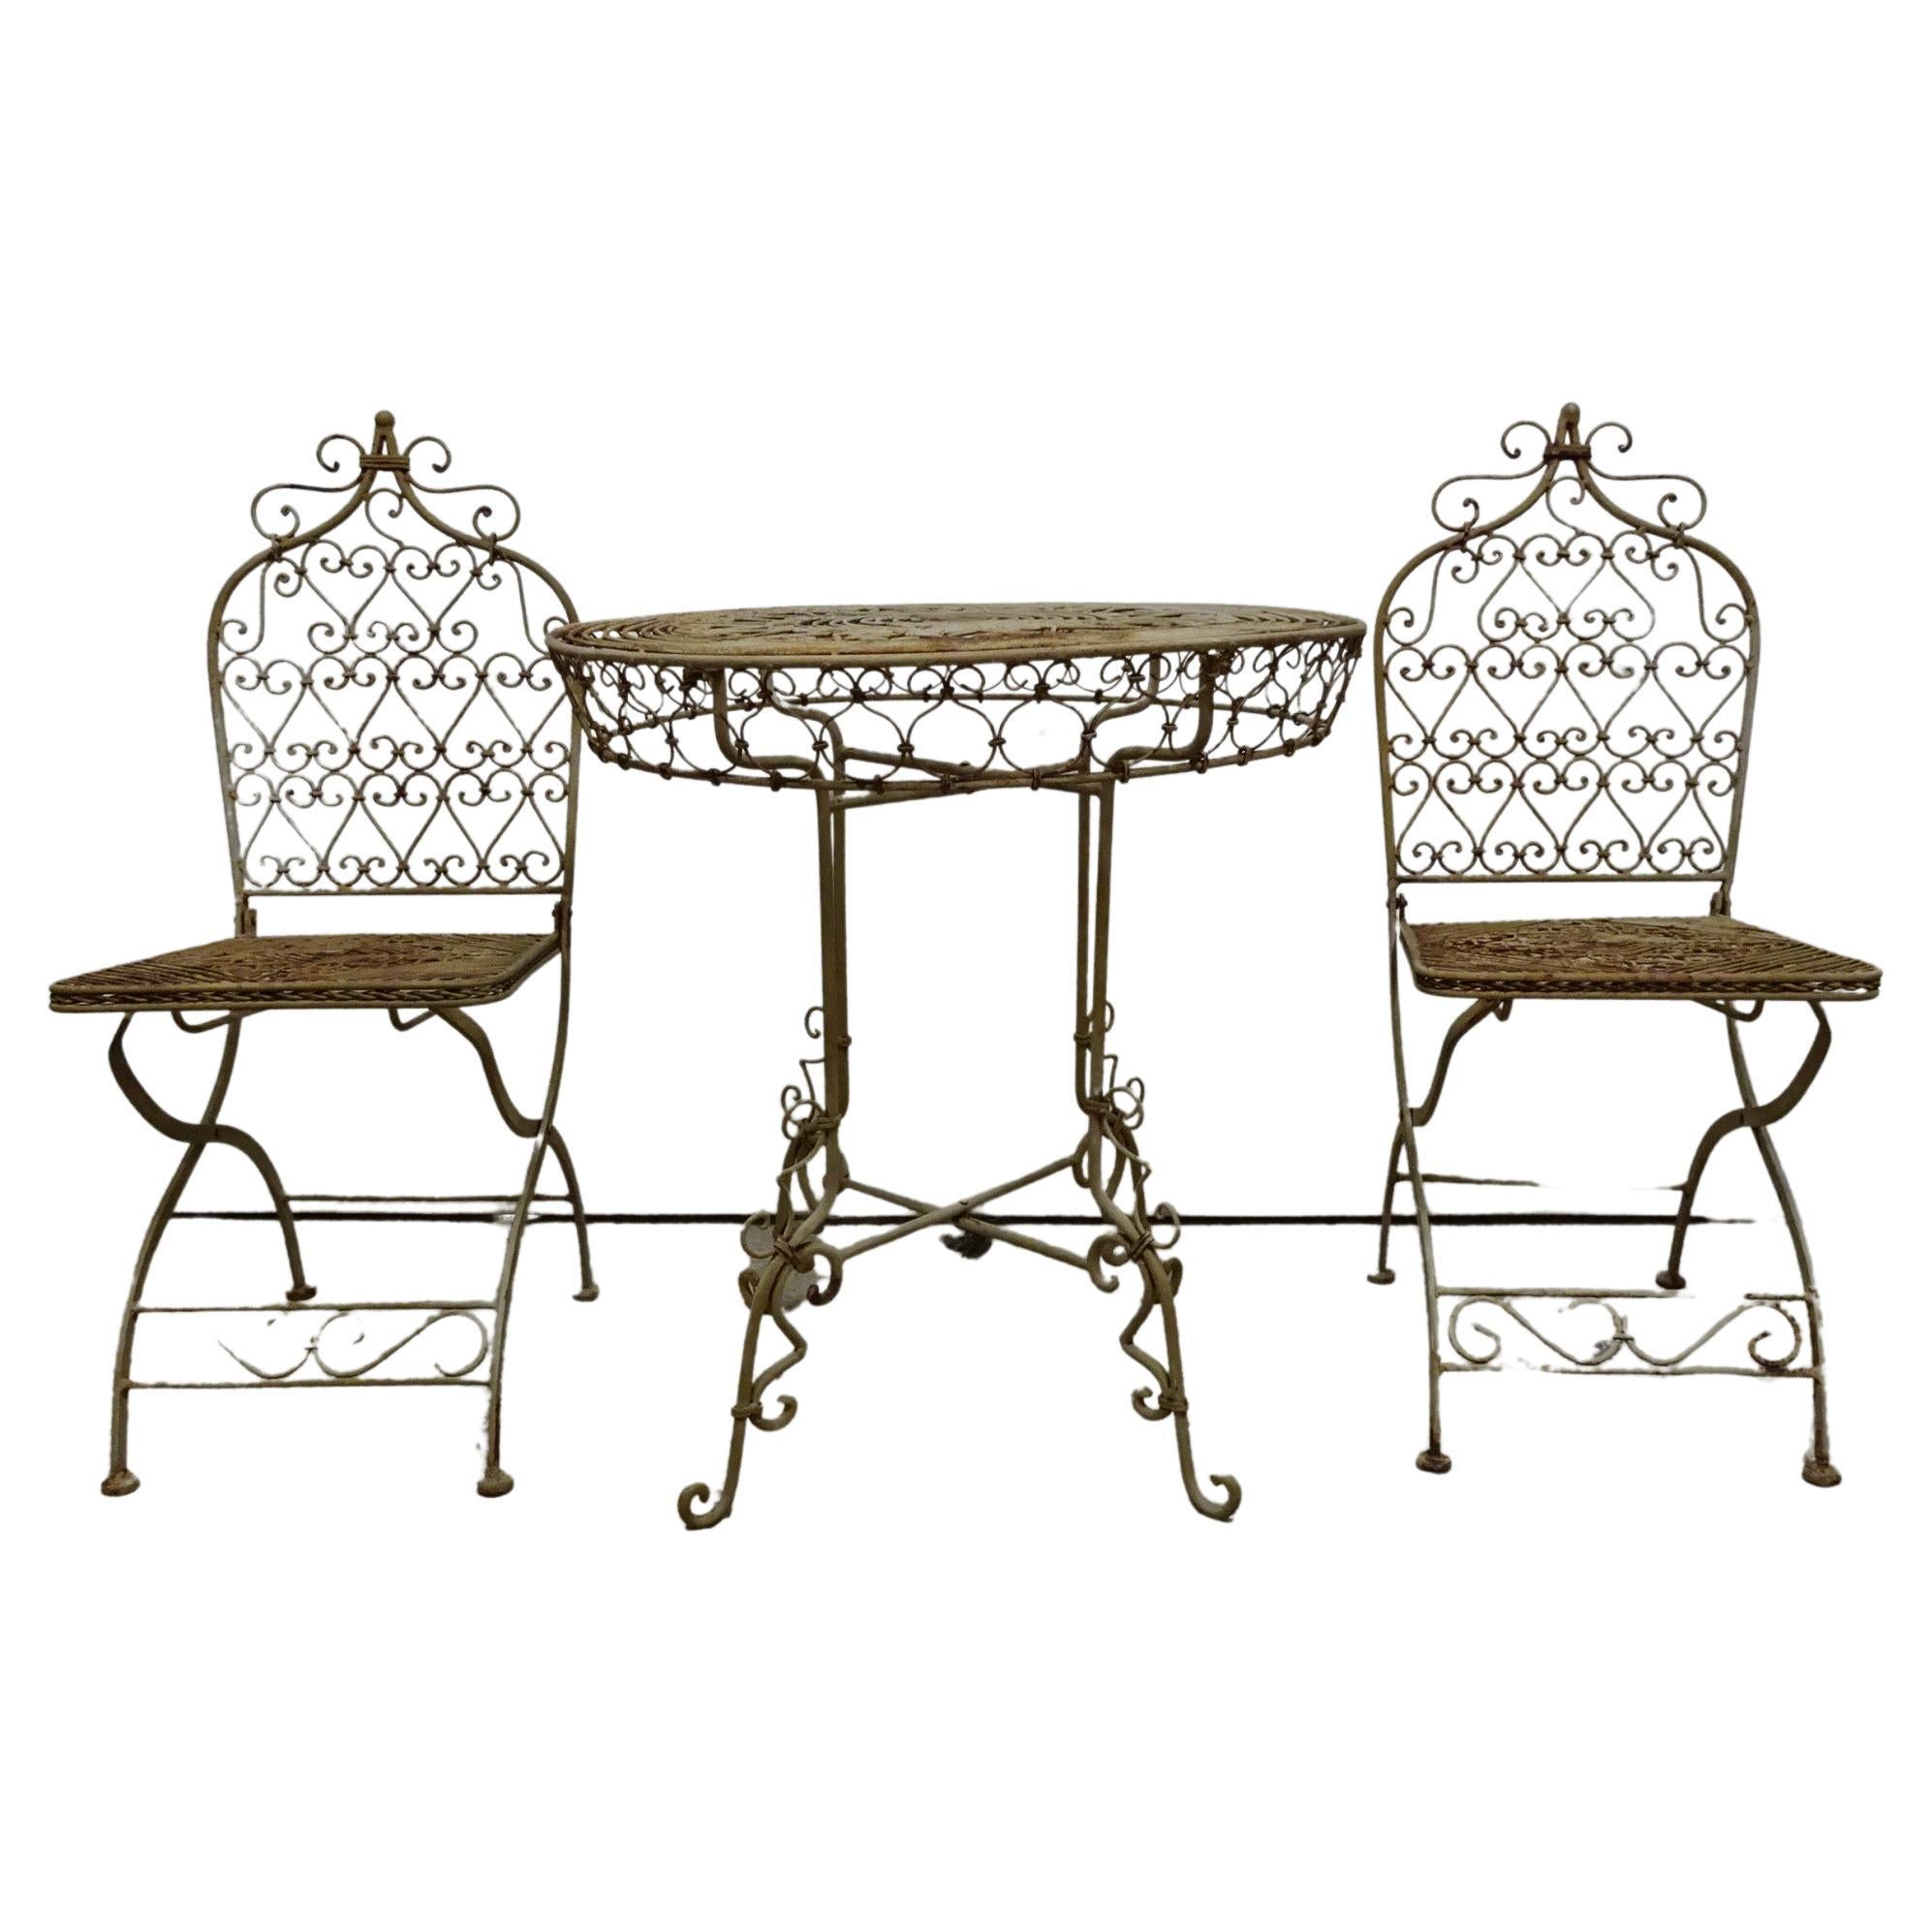 Unique Wrought Iron Table + Chairs For Sale